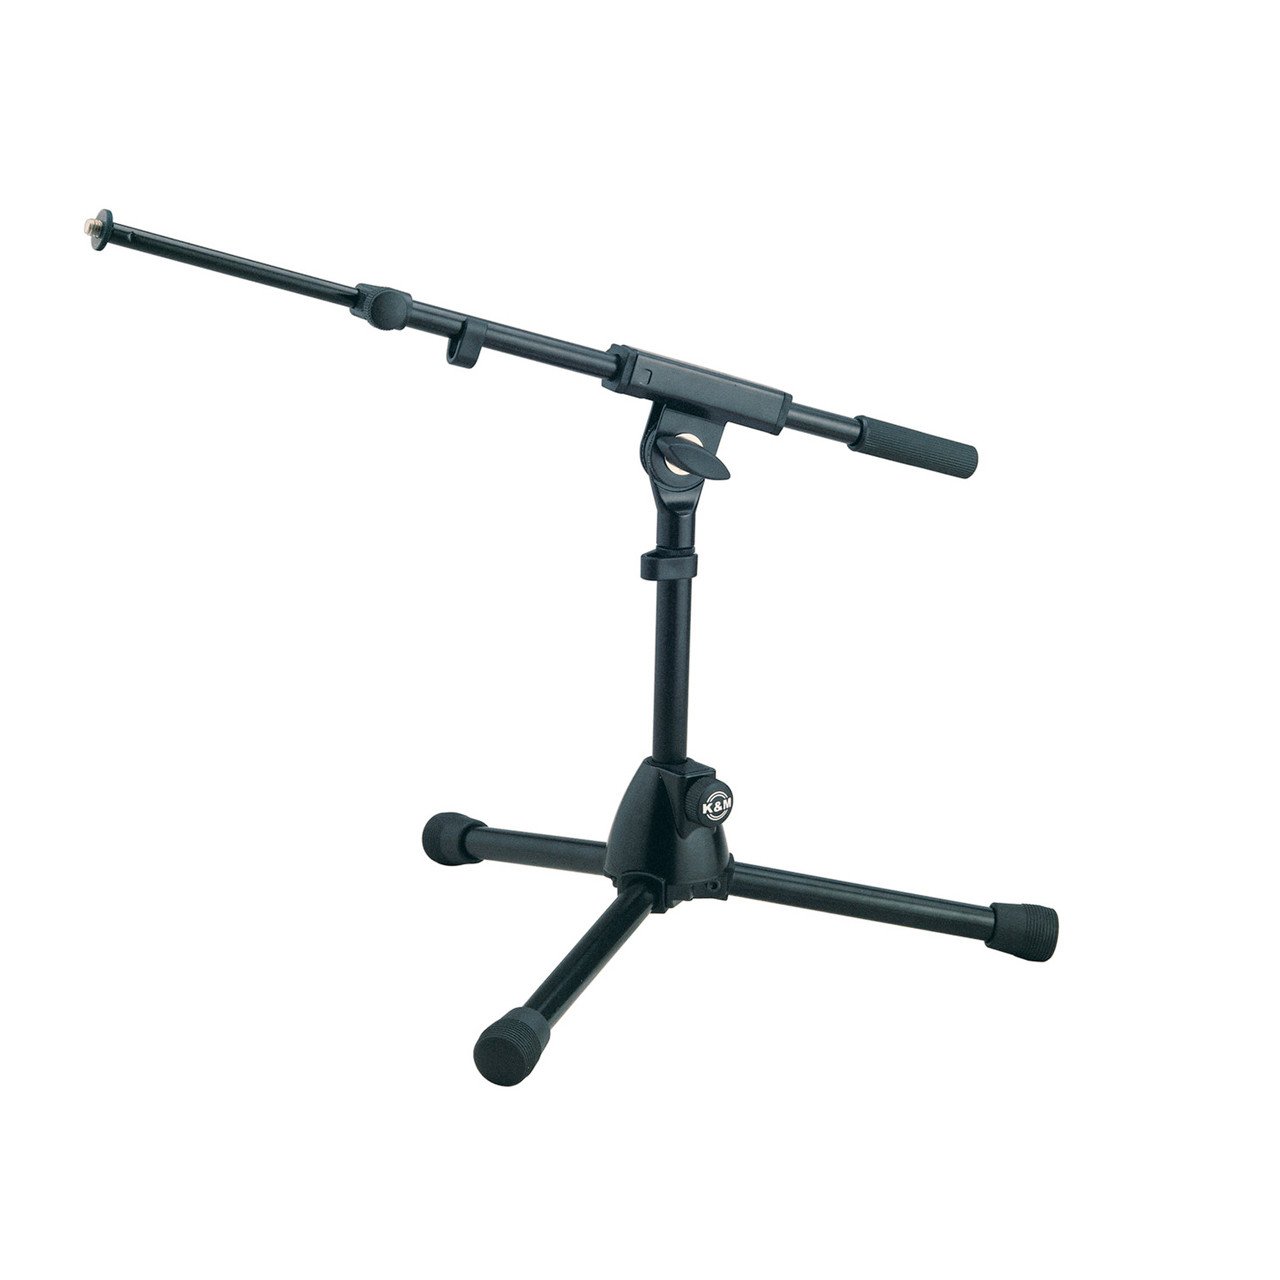 Microphone Accessories - Konig & Meyer 25950 Heavy Duty Short Microphone Stand With Telescopic Boom